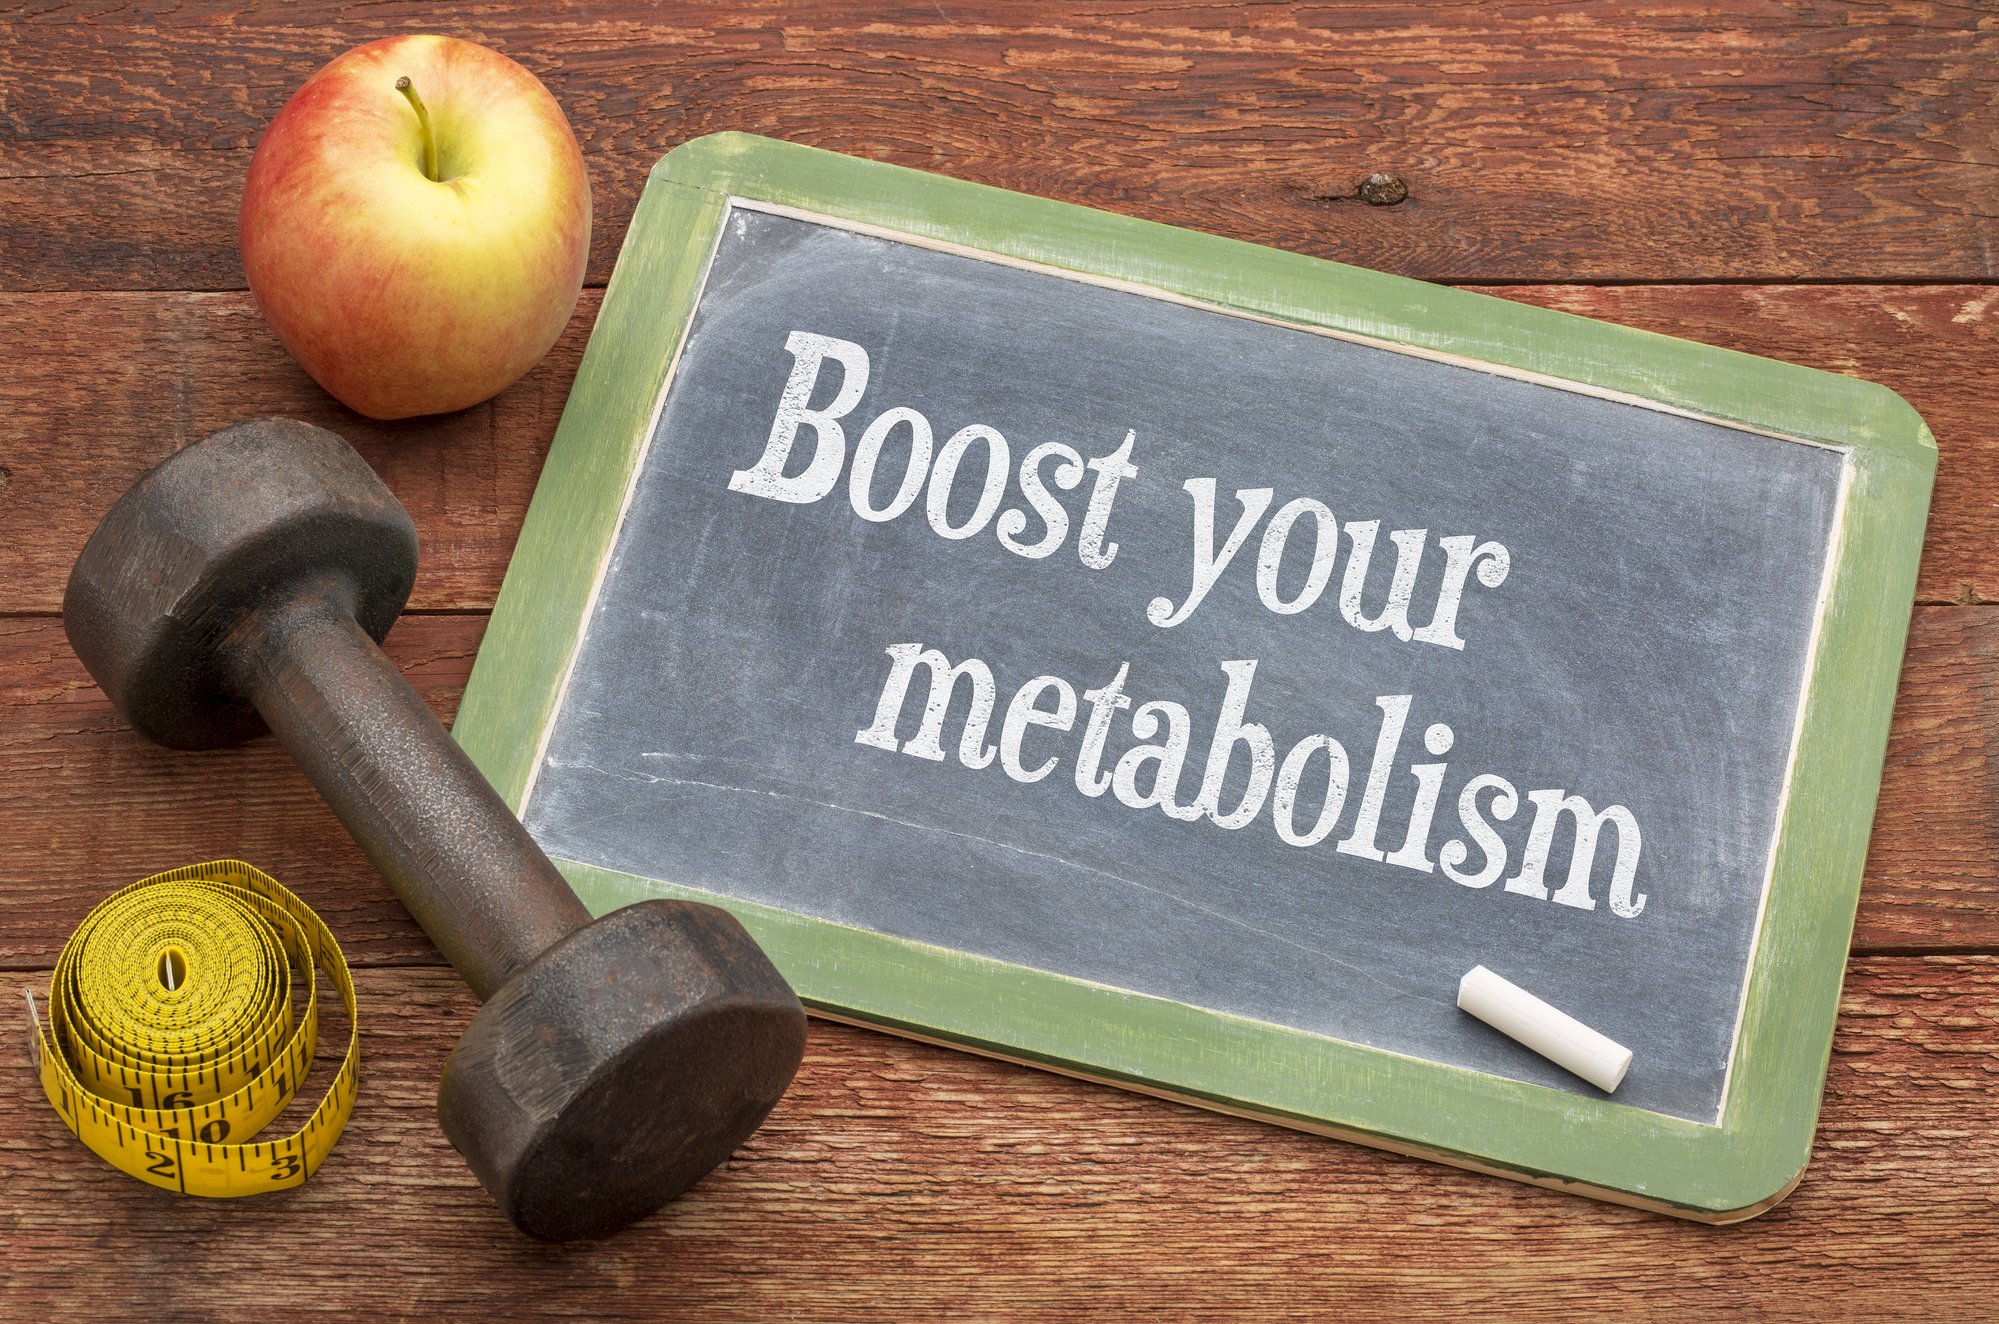 How to Increase Metabolism to Lose Weight Faster